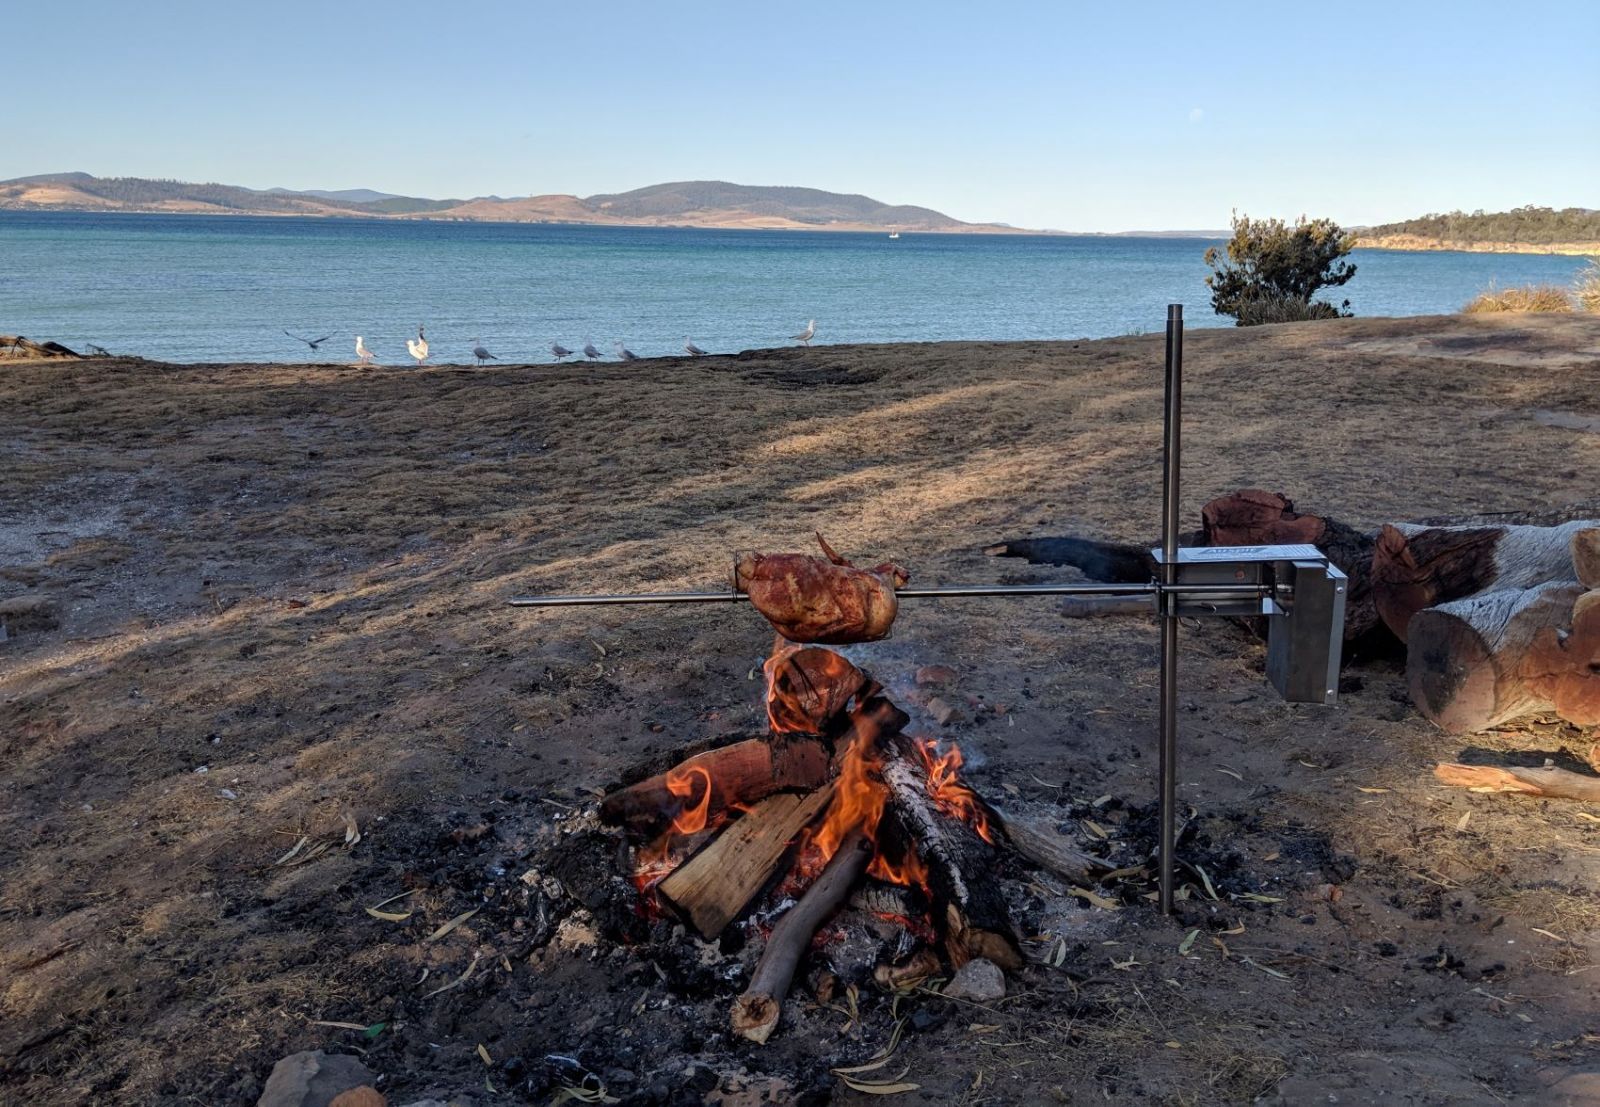 image of the auspit Portable spit rotisserie package cooking a chicken oven an open fire overlooking the ocean with seagulls sitting in front